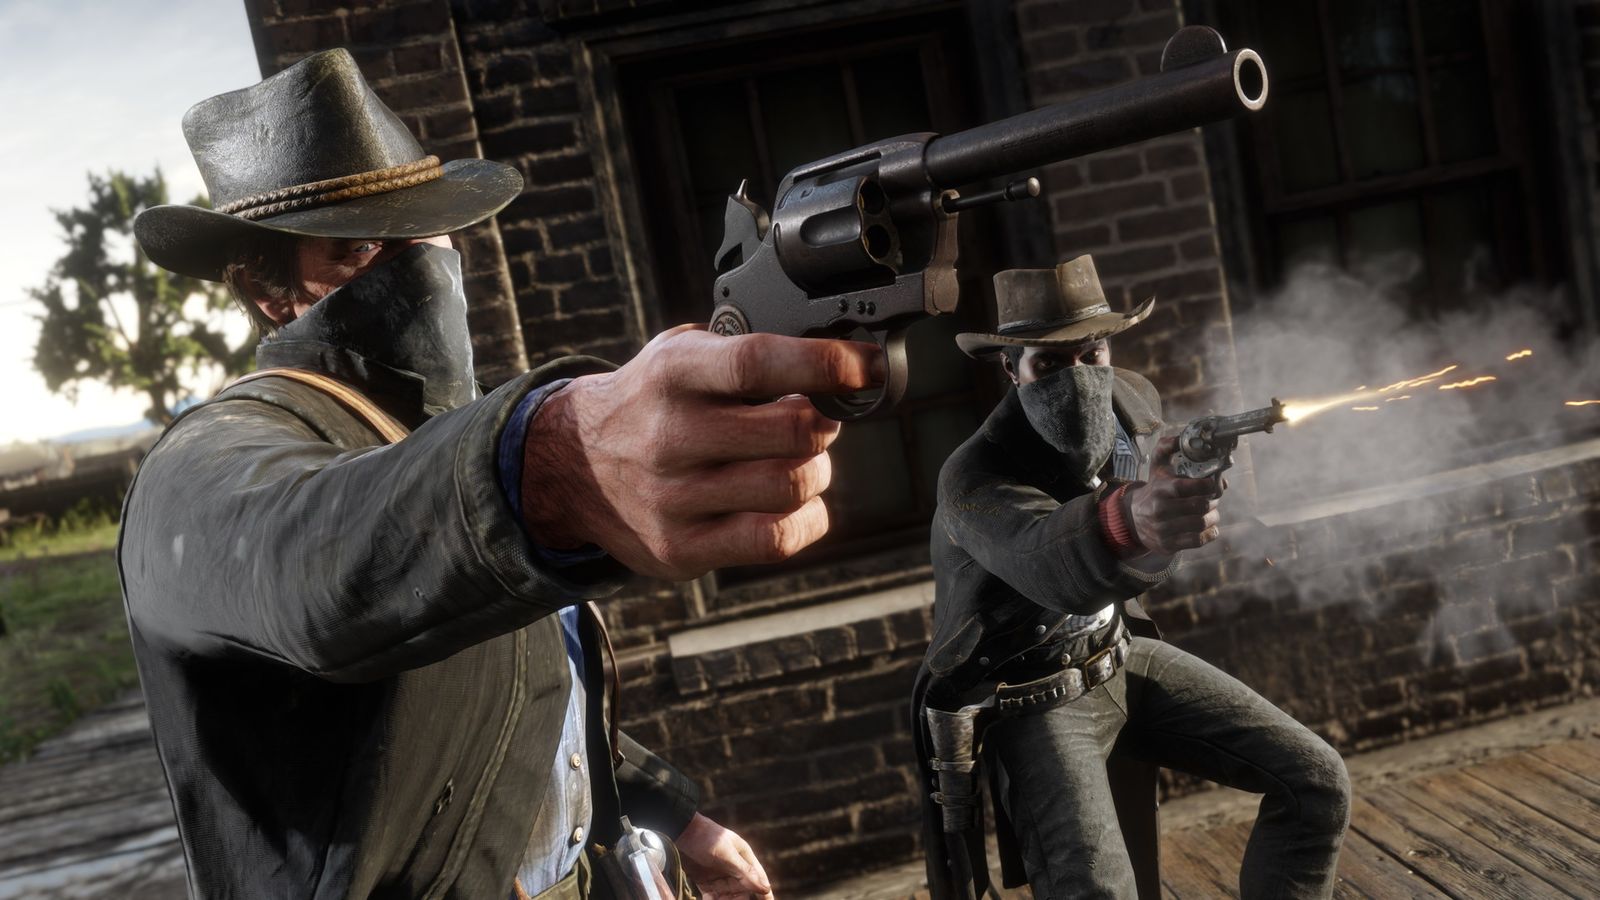 In-game image from Red Dead Redemption 2 of two characters wearing cowboy hats with their faces covered firing pistols.